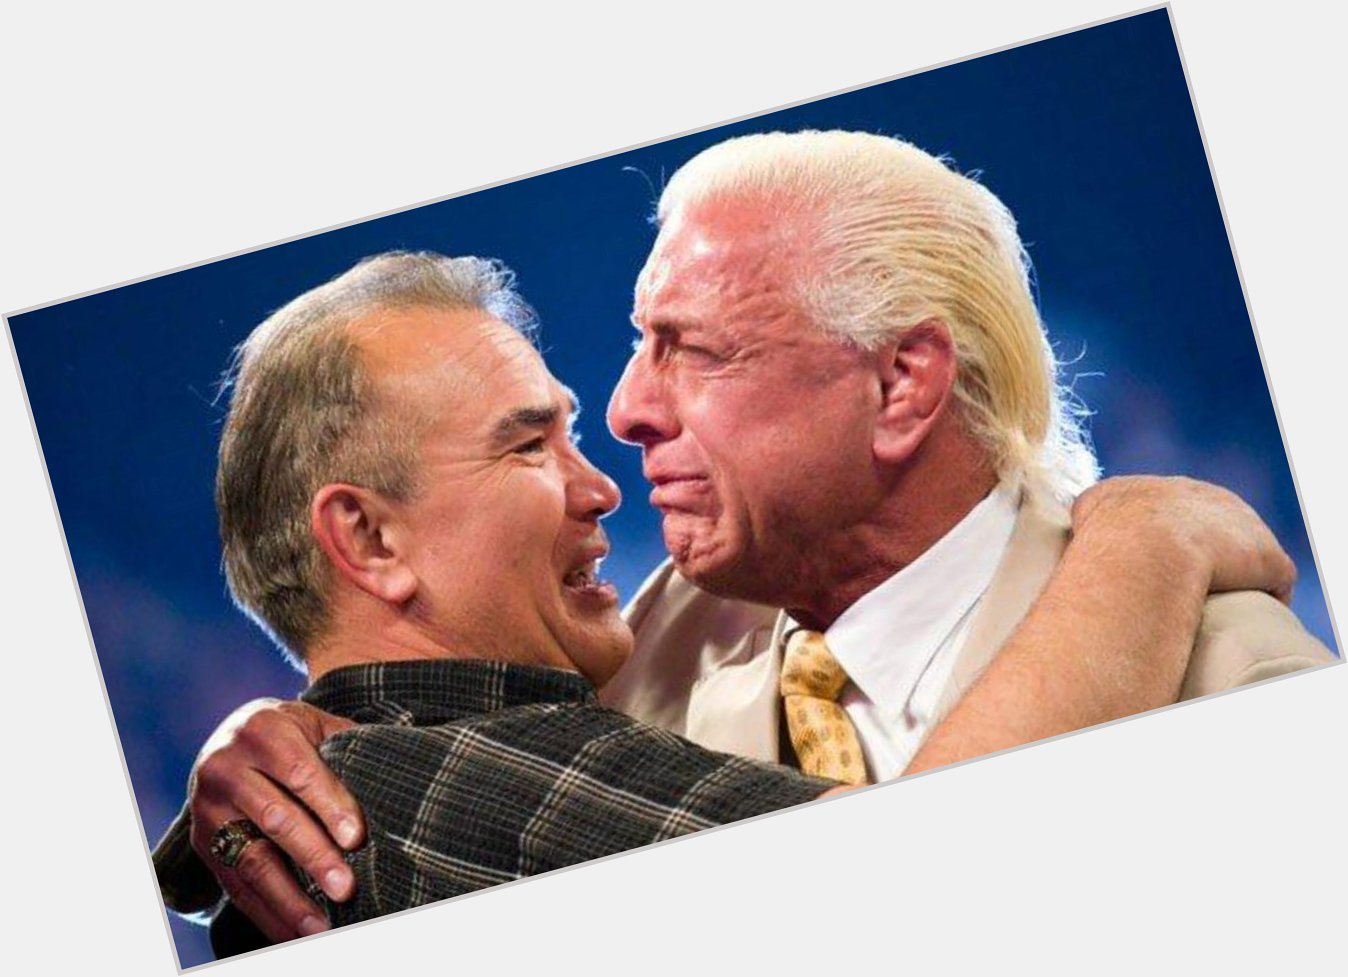 Ric Flair Wishes Ricky Steamboat A Happy Birthday, CGW Event, Note On Vladimir Kozlov, More  